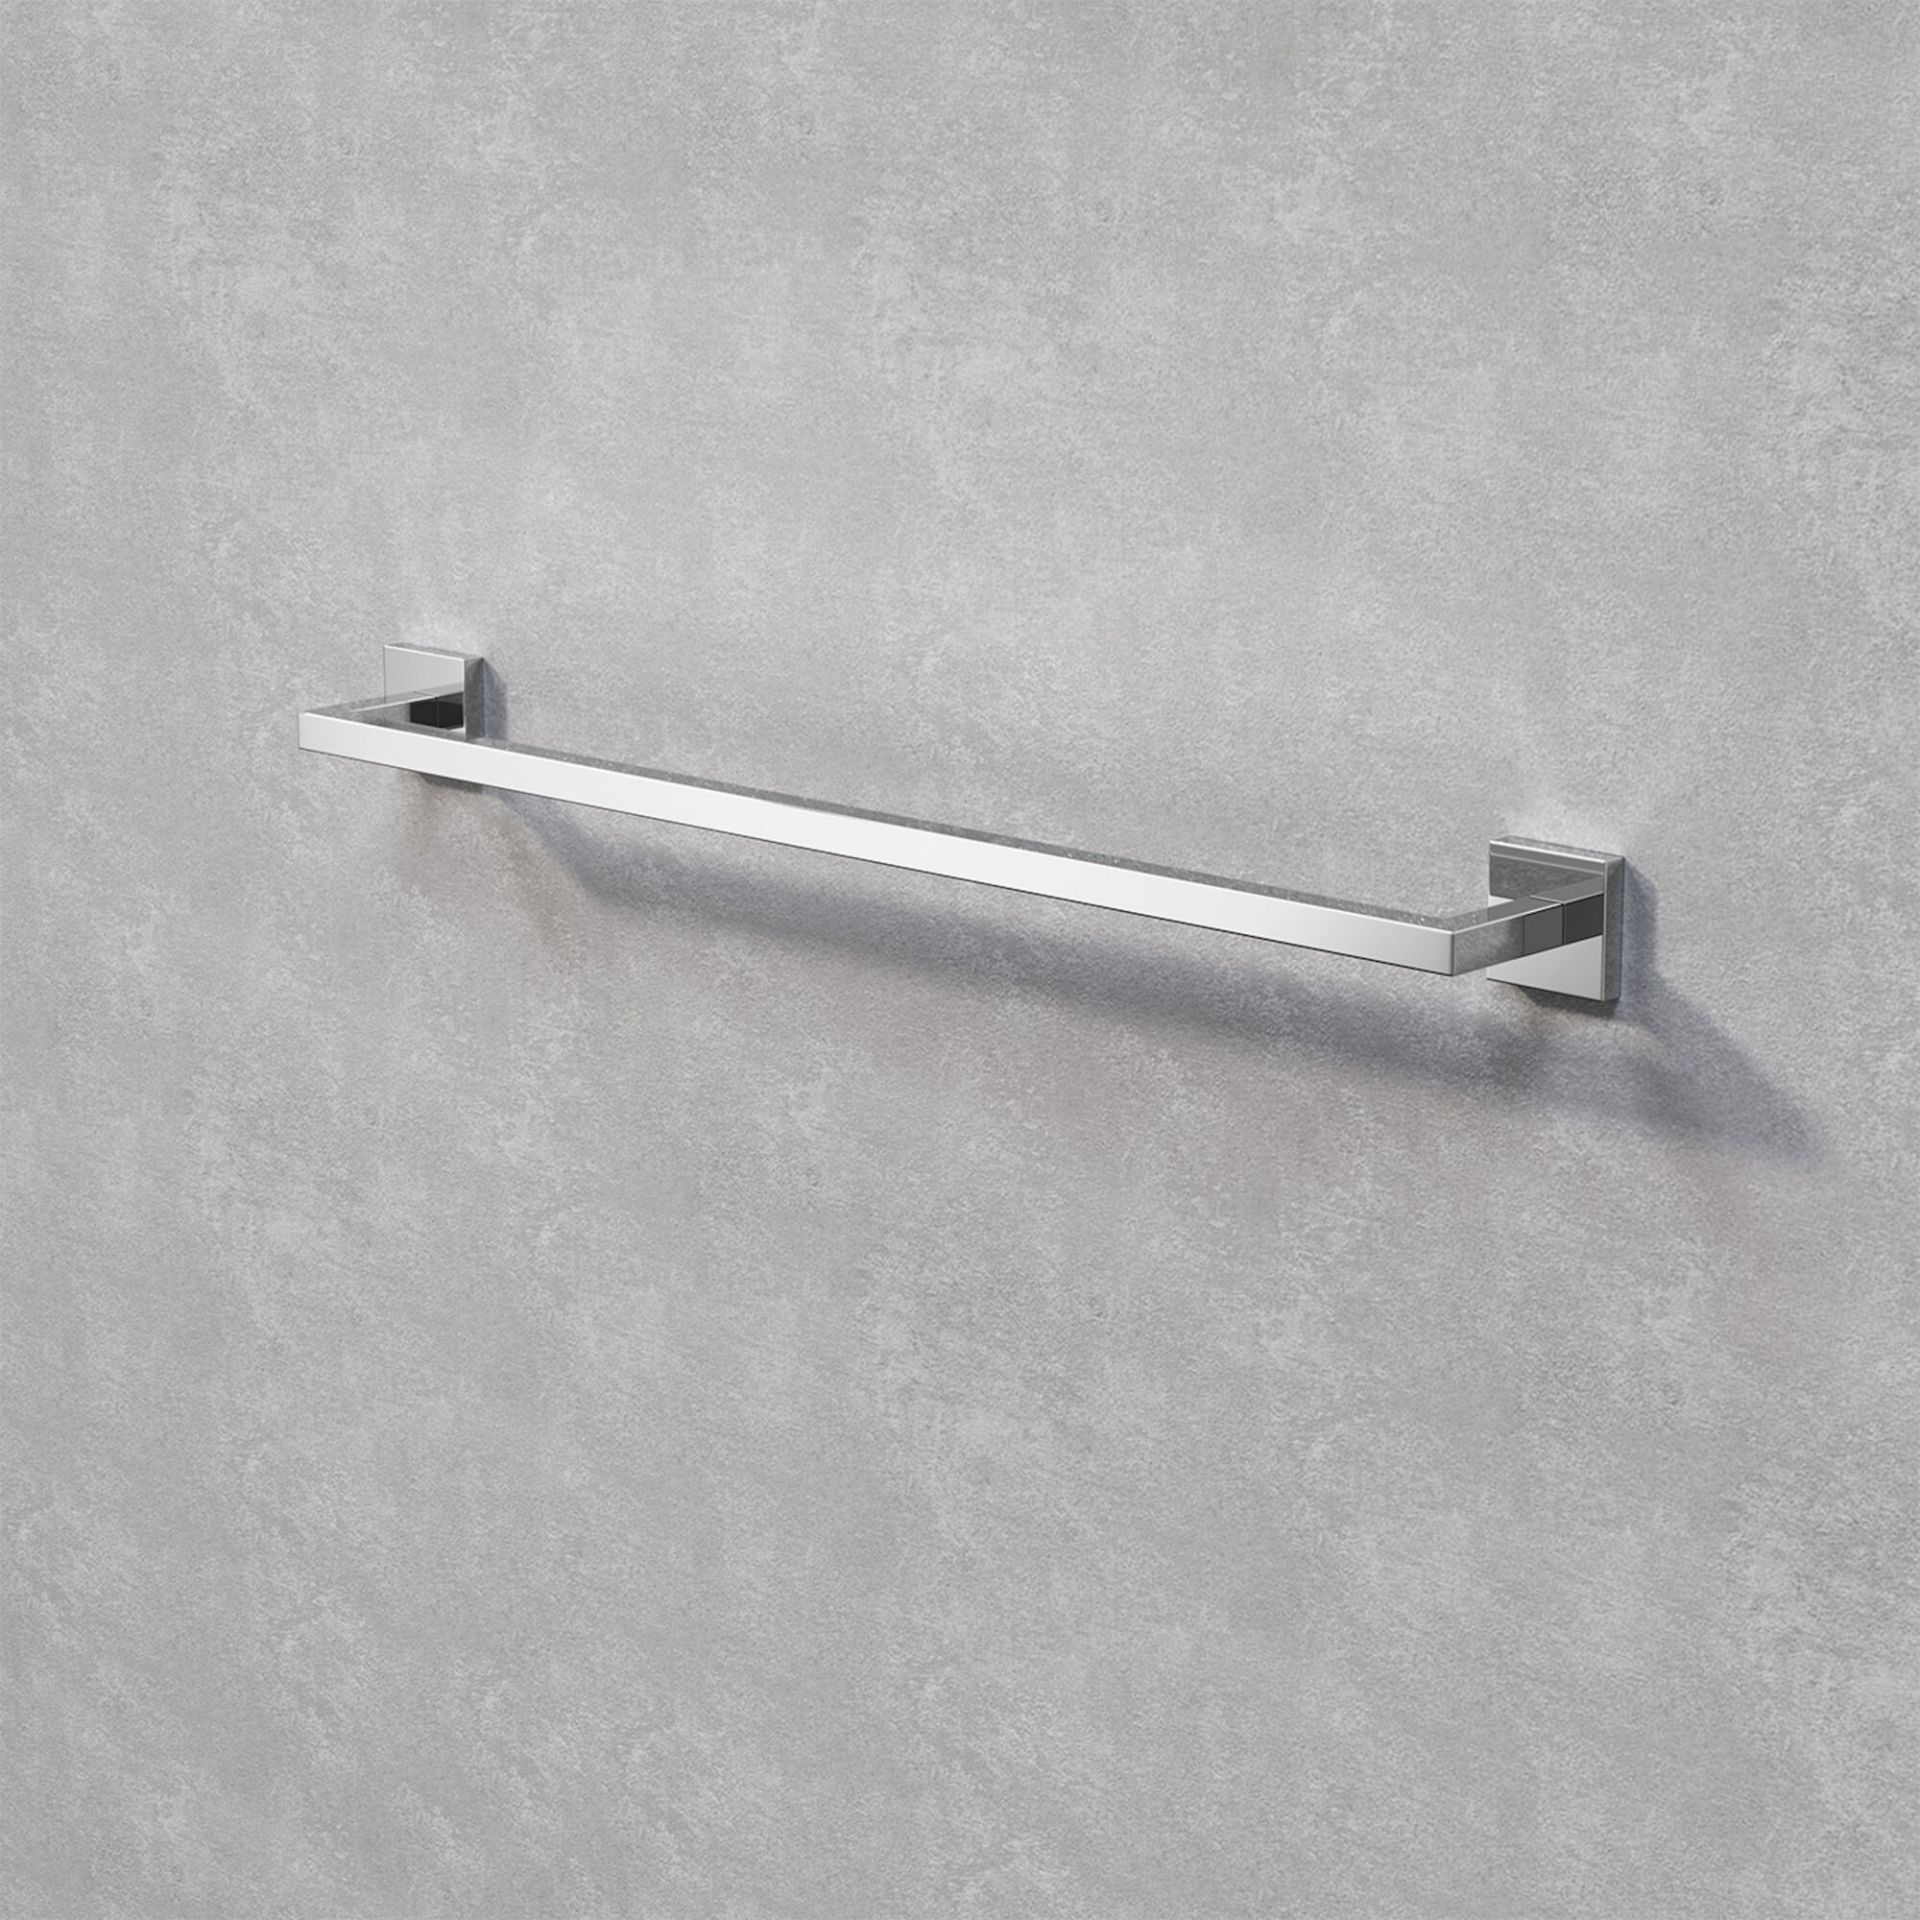 (D1005) Jesmond Towel Rail Finishes your bathroom with a little extra functionality and style ... - Image 2 of 3